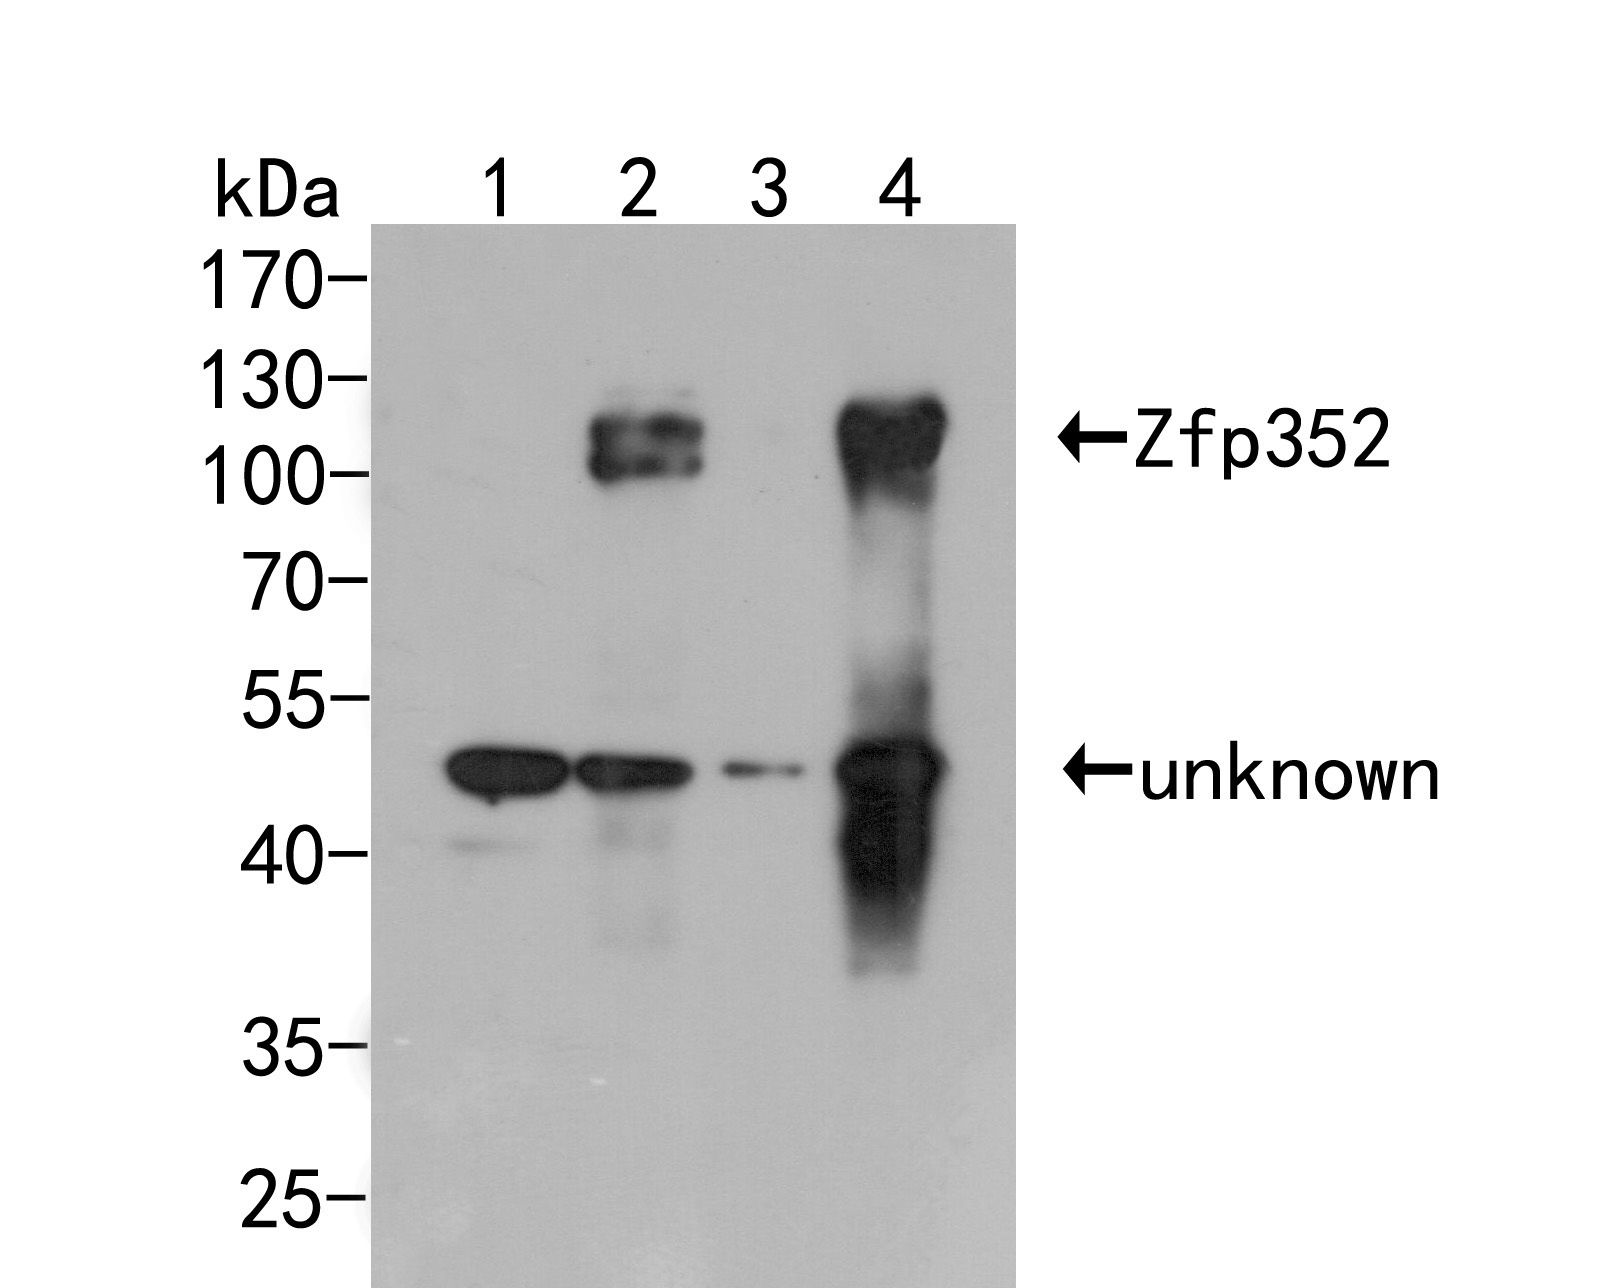 Western blot analysis of Zfp352 on different lysates. Proteins were transferred to a PVDF membrane and blocked with 5% BSA in PBS for 1 hour at room temperature. The primary antibody (ER2001-55, 1/1000) was used in 5% BSA at room temperature for 2 hours. Goat Anti-Rabbit IgG - HRP Secondary Antibody (HA1001) at 1:5,000 dilution was used for 1 hour at room temperature.<br />
Positive control:<br />
Lane 1: Non-transfected 293T cells lysate<br />
Lane 2: GFP-tagged Zfp352 transfected 293T cells lysate<br />
Lane 3: Non-transfected 293F cells lysate<br />
Lane 4: GFP-tagged Zfp352 transfected 293F cells lysate